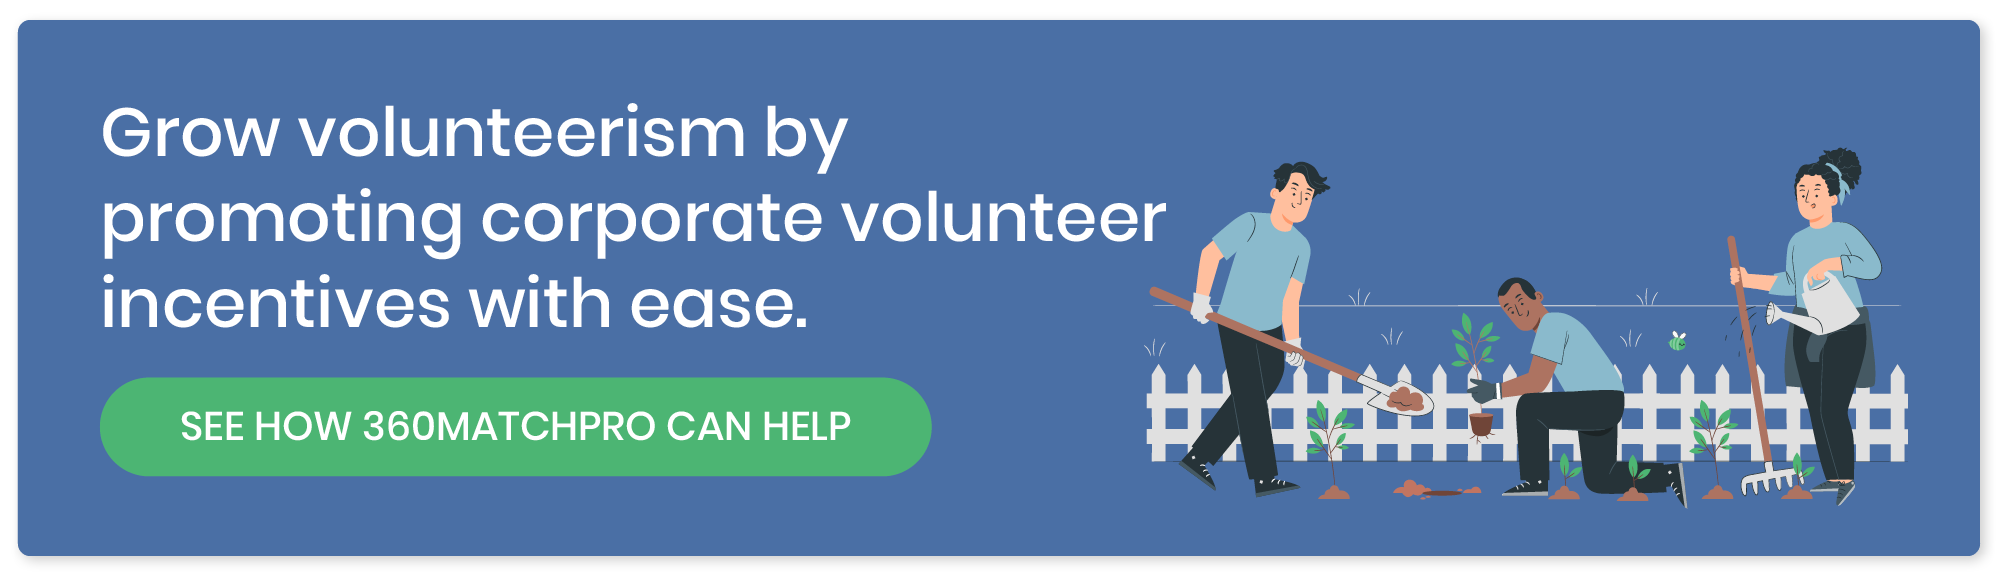 Grow volunteerism by promoting corporate volunteer incentives with ease. See how 360MatchPro can help.